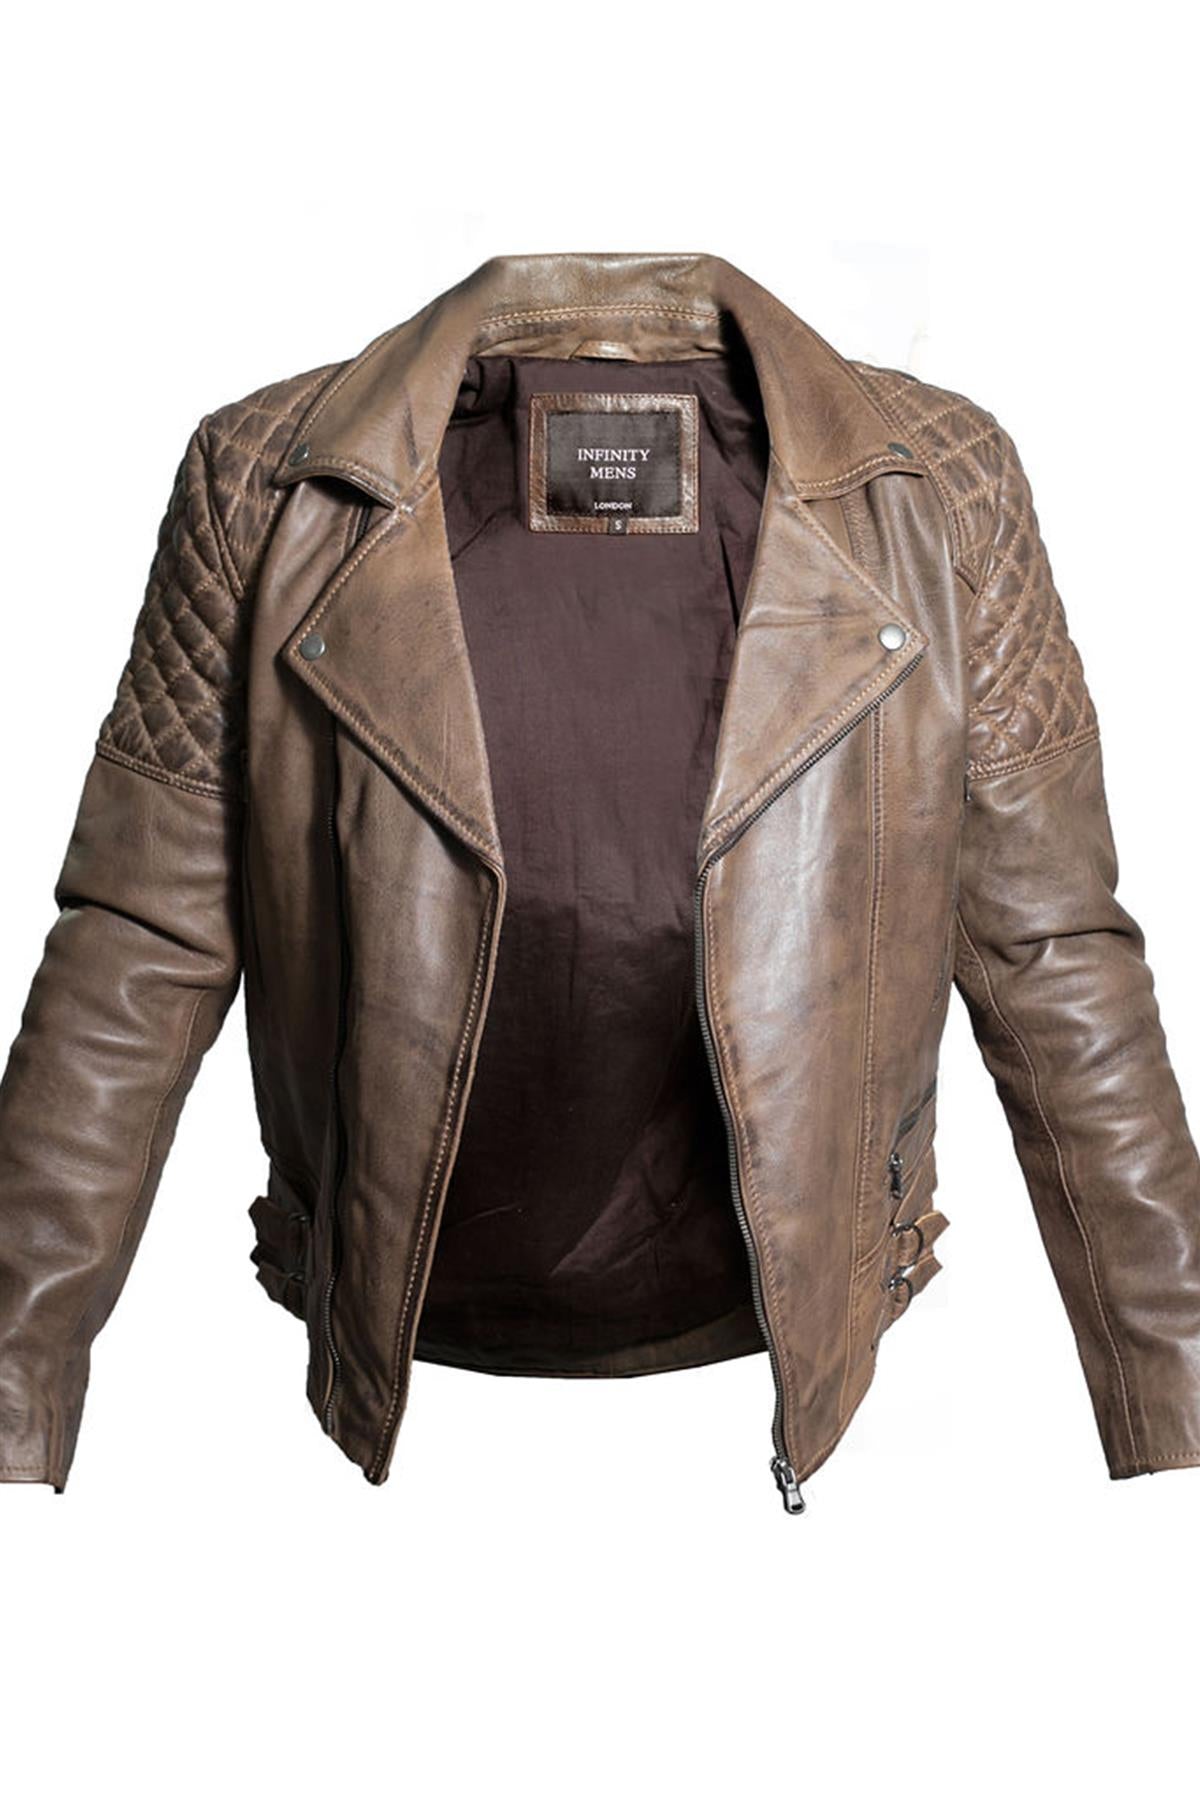 Mens Quilted Leather Biker Jacket-Stonehouse - Upperclass Fashions 